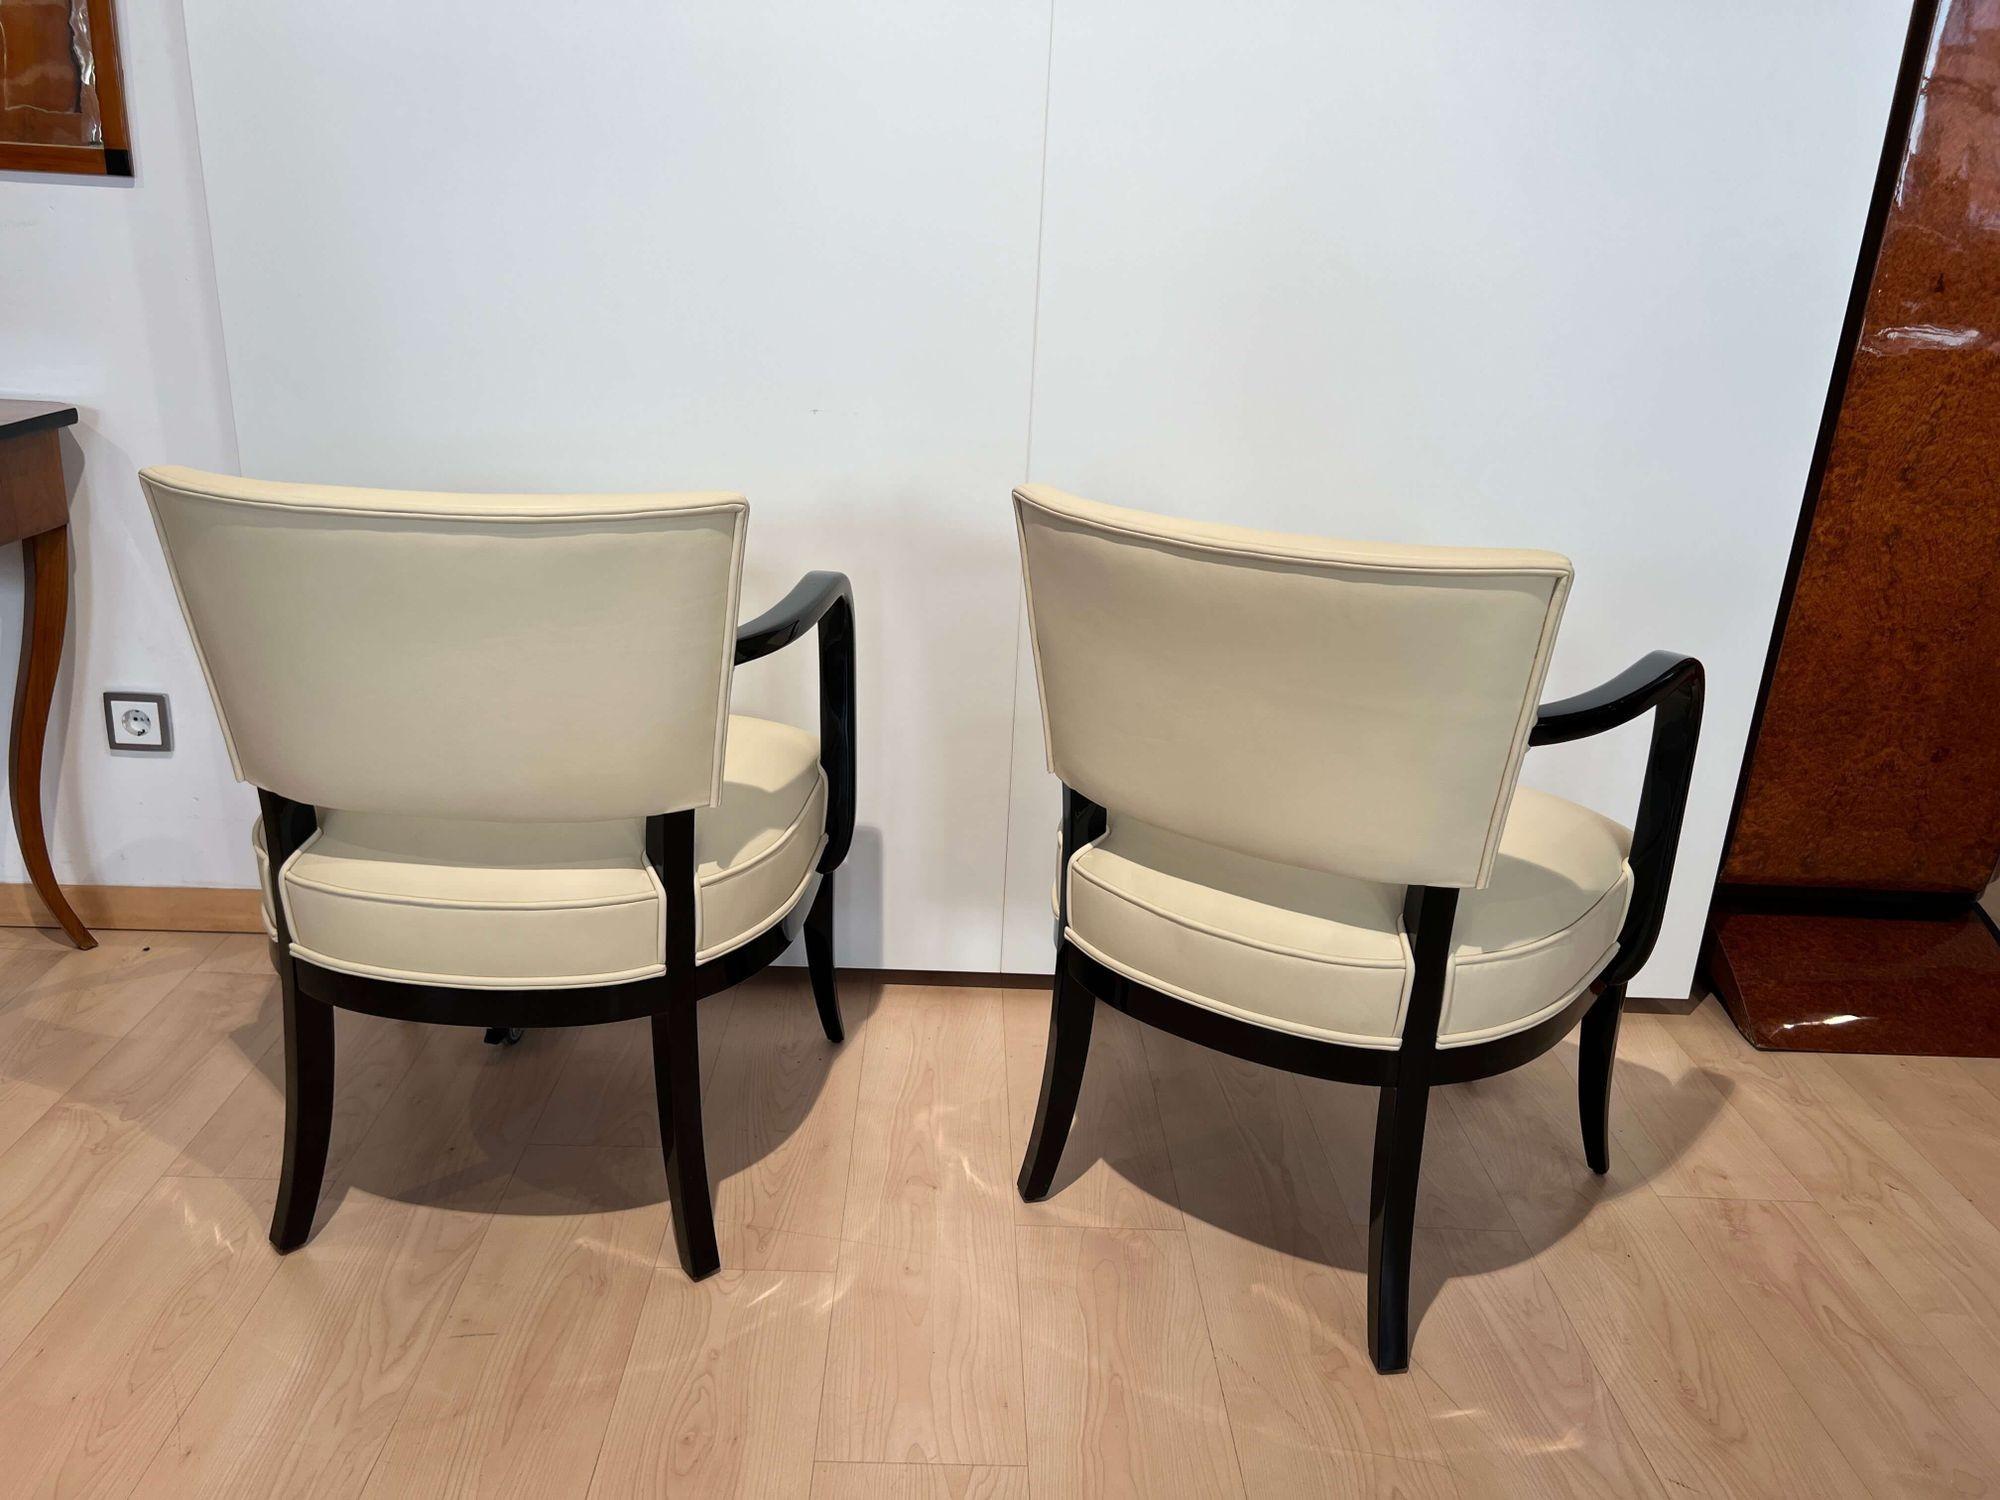 Pair of Art Deco Armchairs, Black Lacquer, Creme Leather, France, 1930s For Sale 2